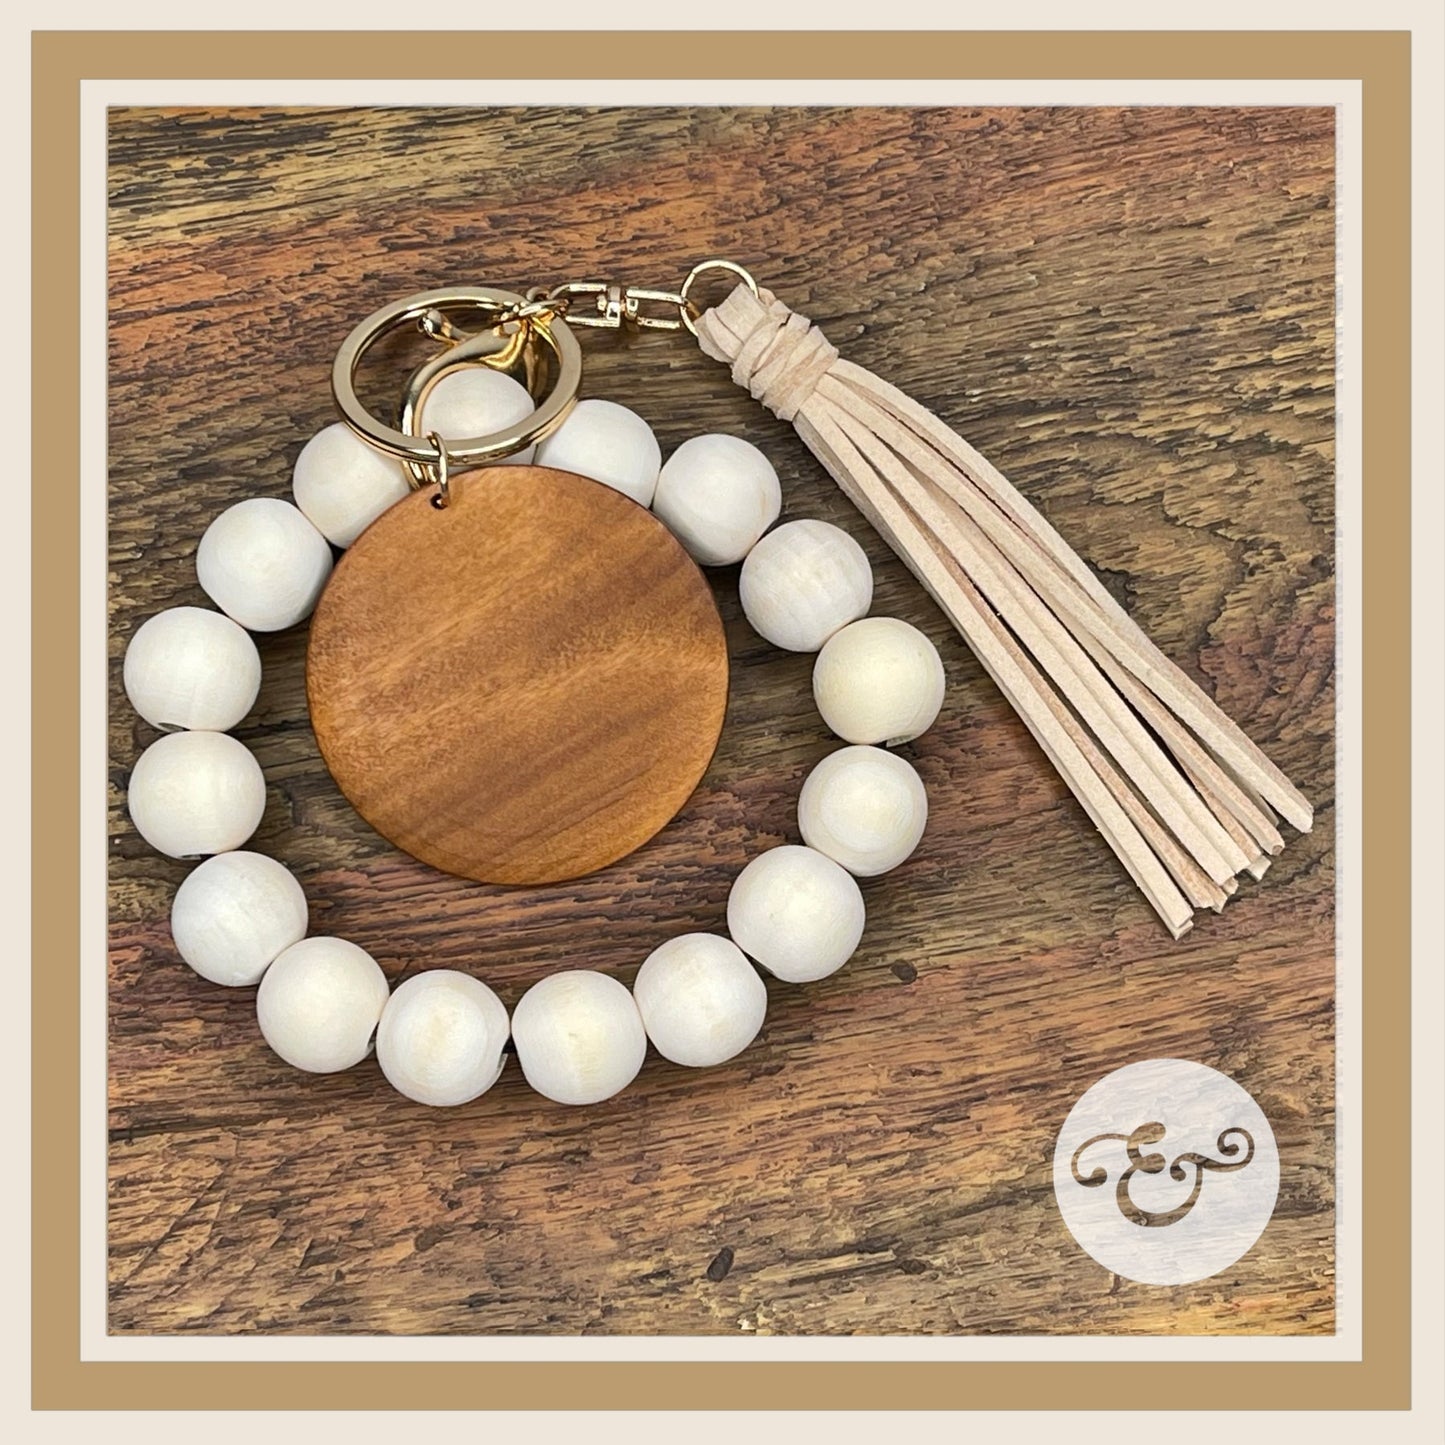 Wooden Bead Wristlets With Suede Tassel (6688691257422) (6688719405134) (6688894517326)